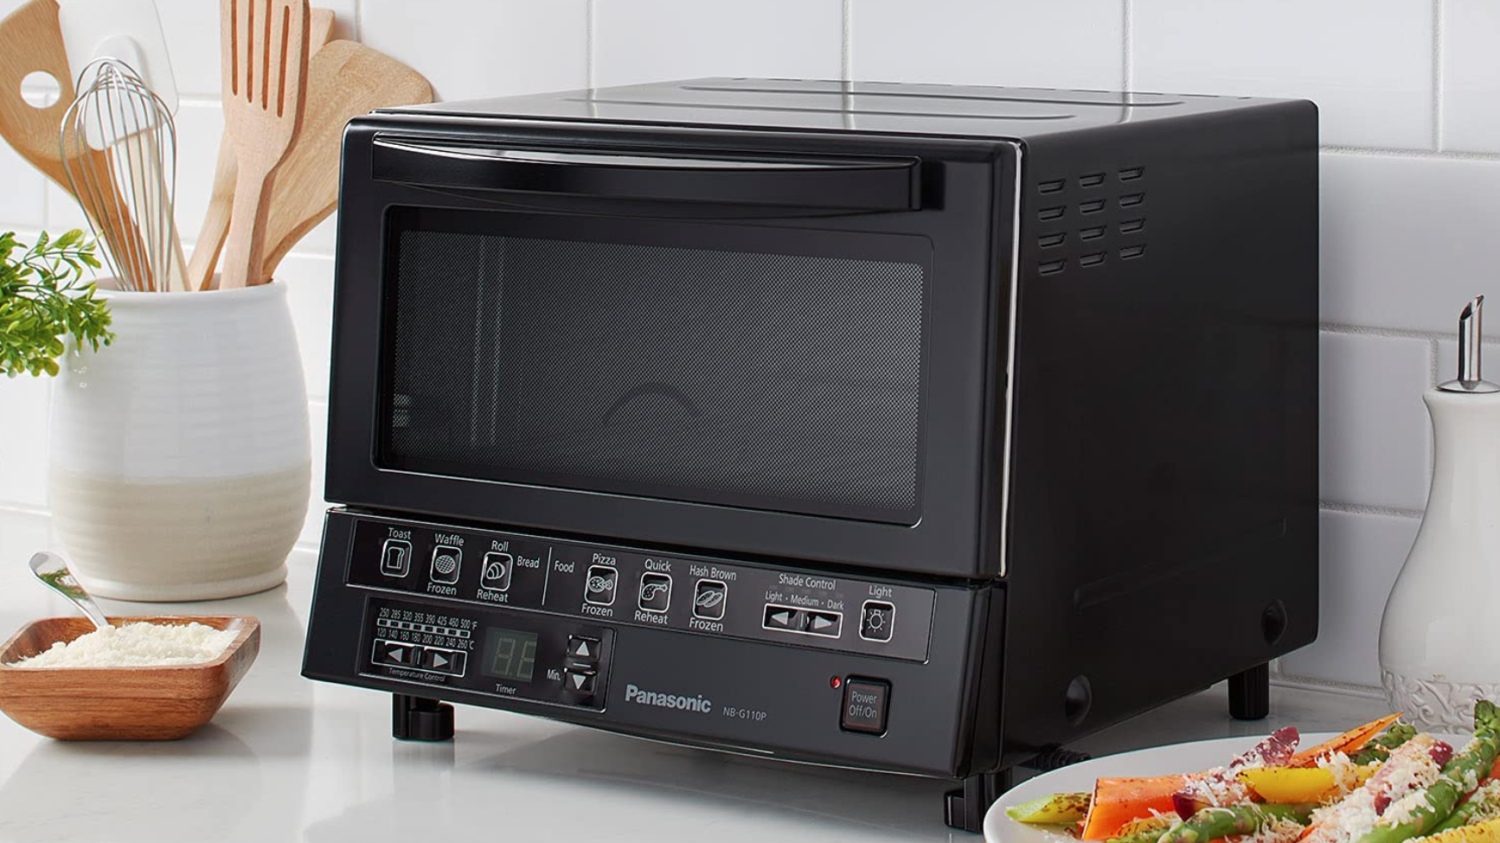 https://www.simplemost.com/wp-content/uploads/2022/07/toaster-oven-main-e1658754025410.png